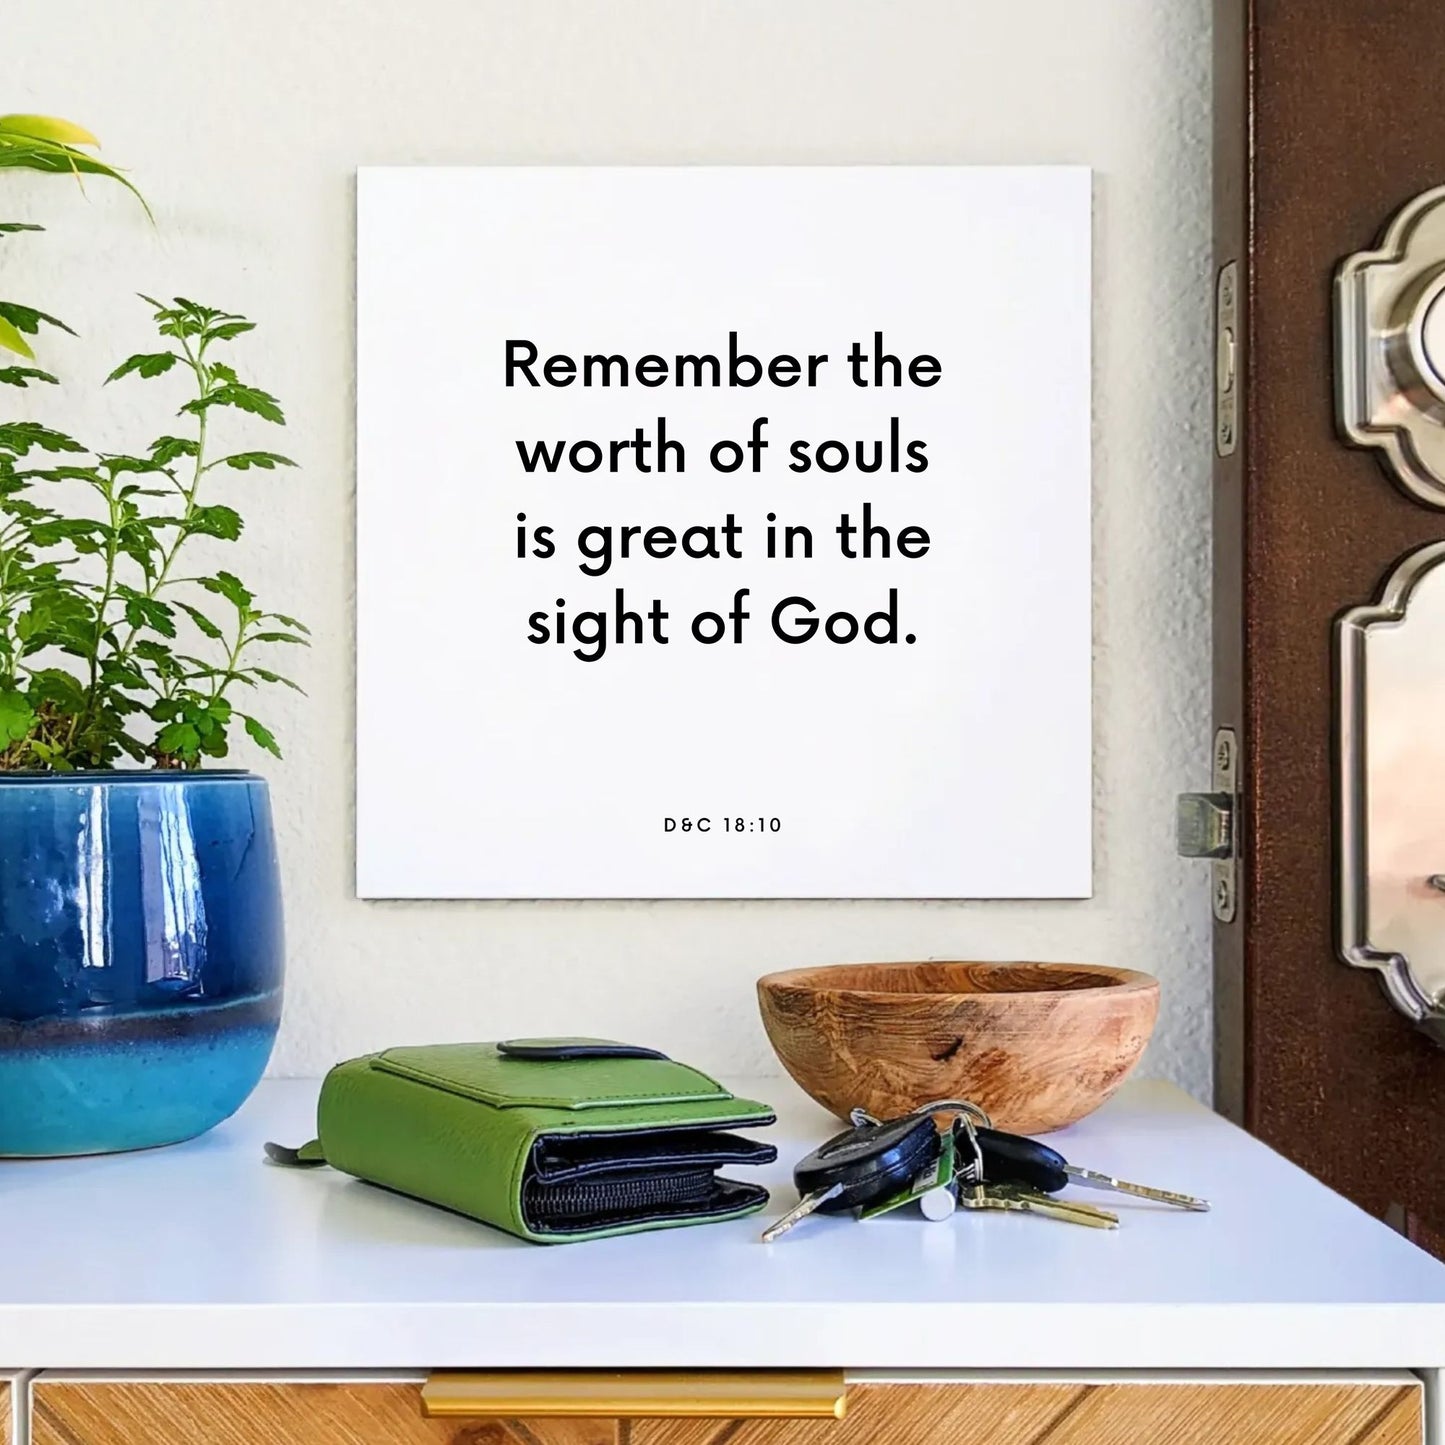 Entryway mouting of the scripture tile for D&C 18:10 - "Remember the worth of souls is great in the sight of God"